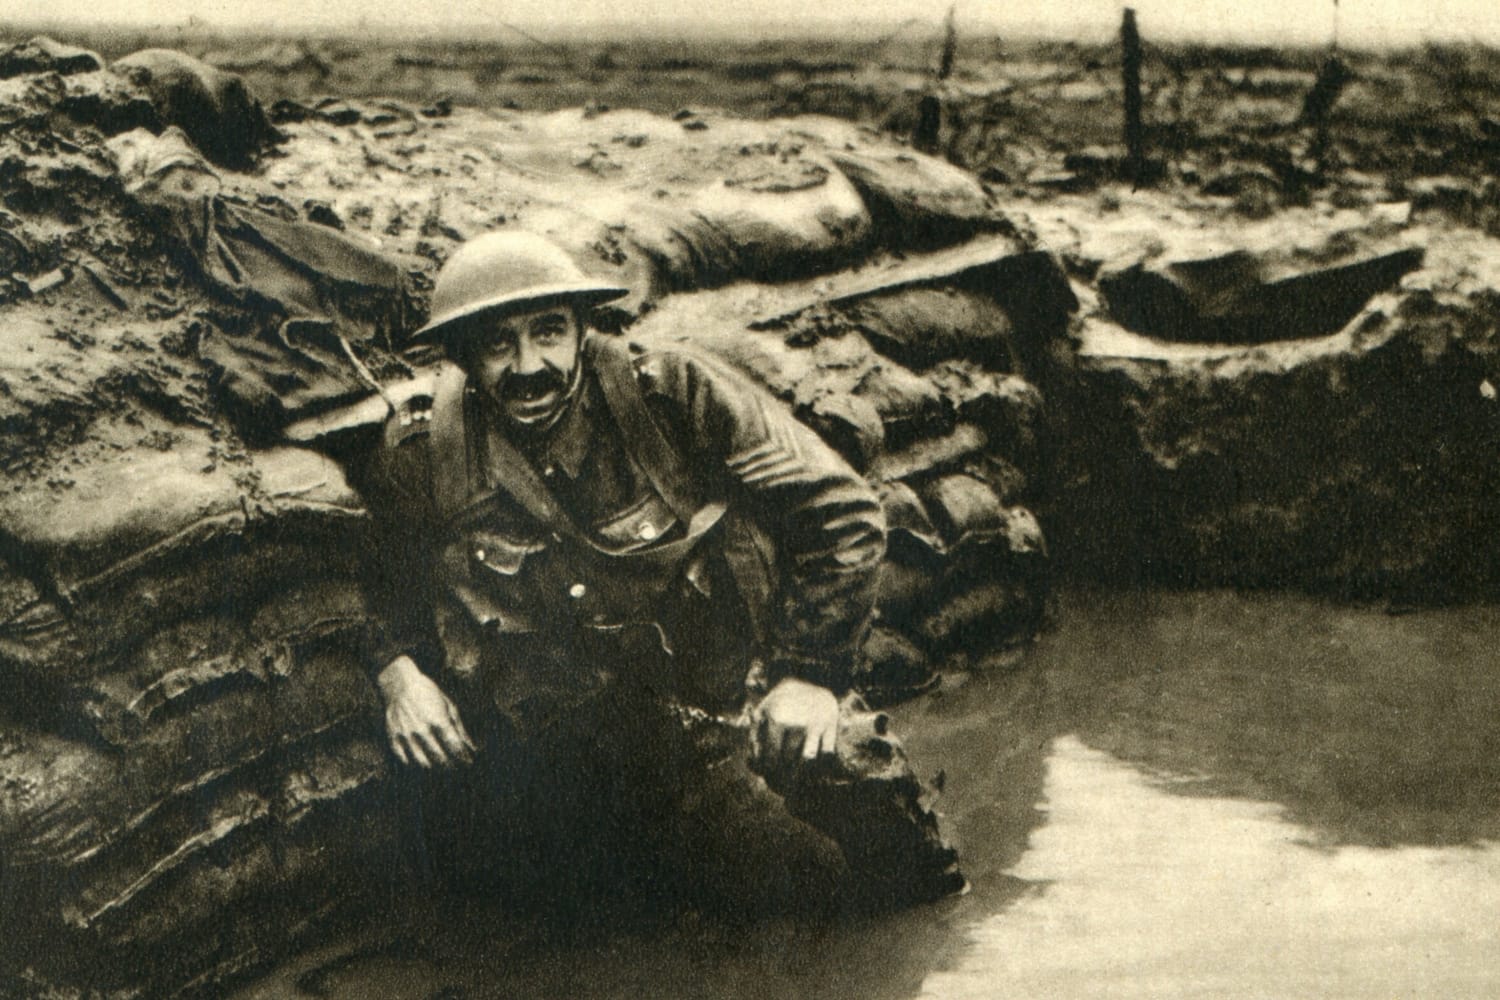 A British soldier rests in a waterlogged trench in Belgium, during the battle of Pashendale, September of 1917